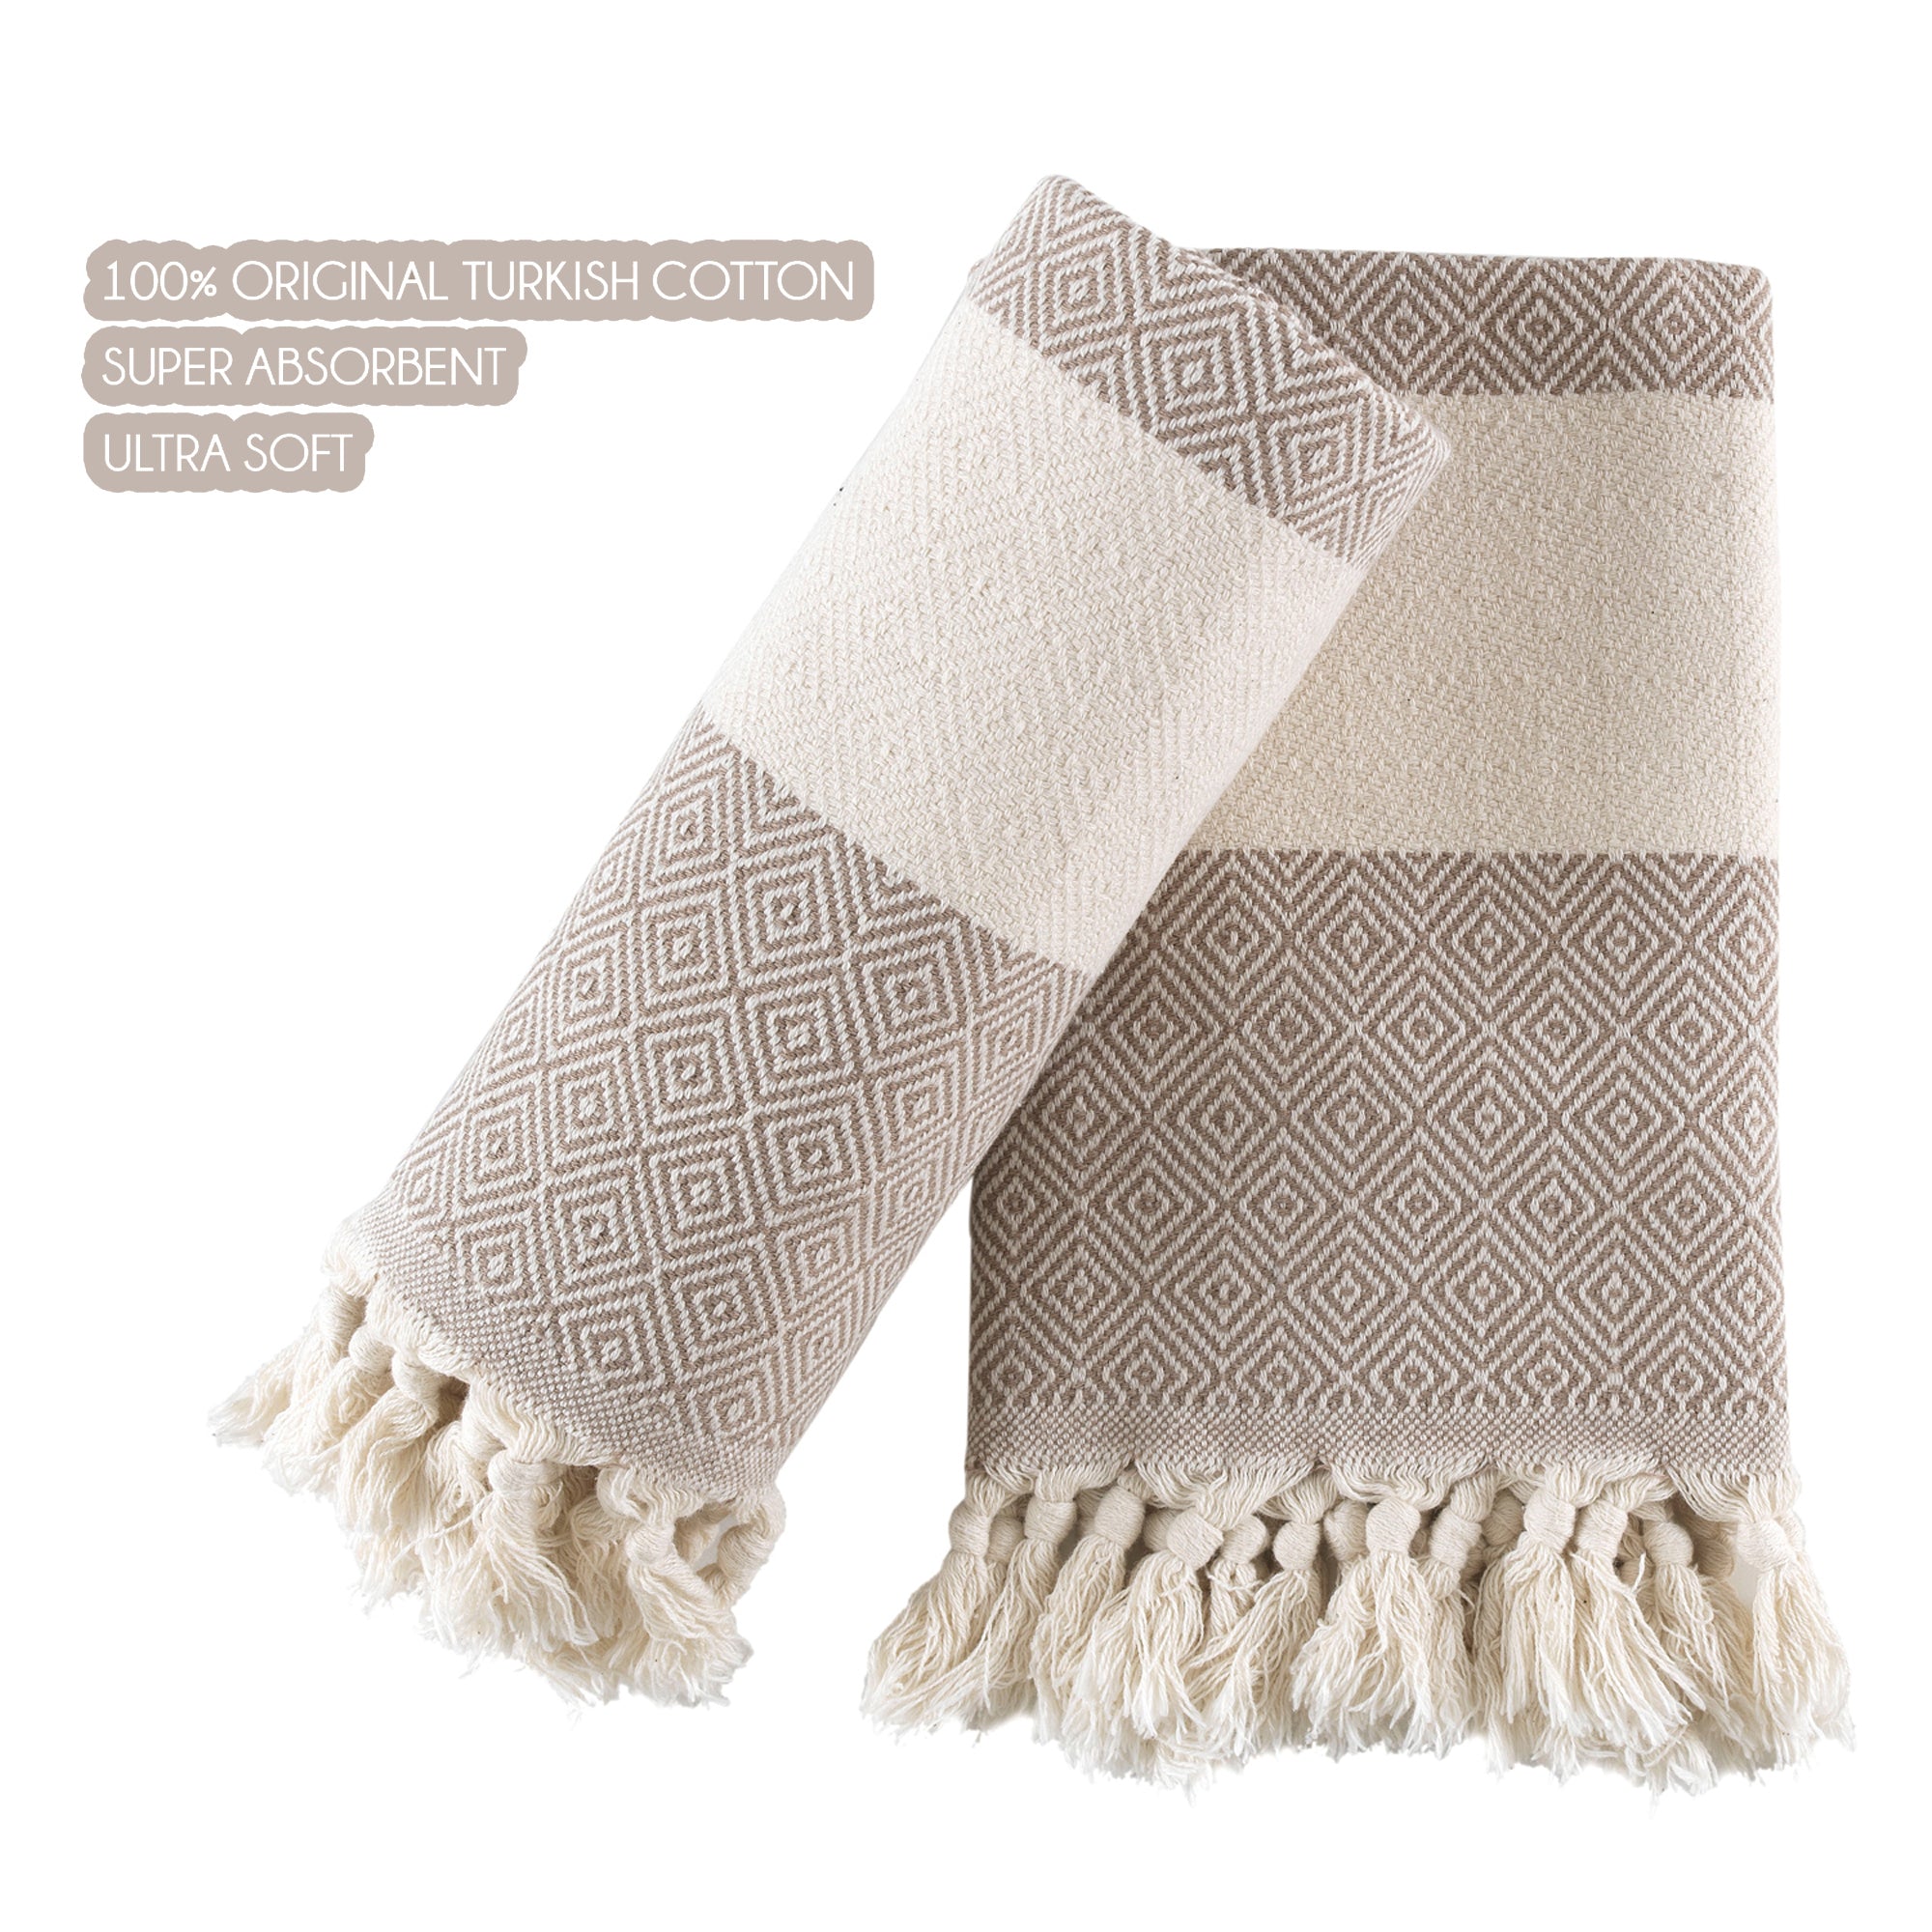 Hiera Home Kitchen Towels - Ultra Soft Cotton and Super Absorbent